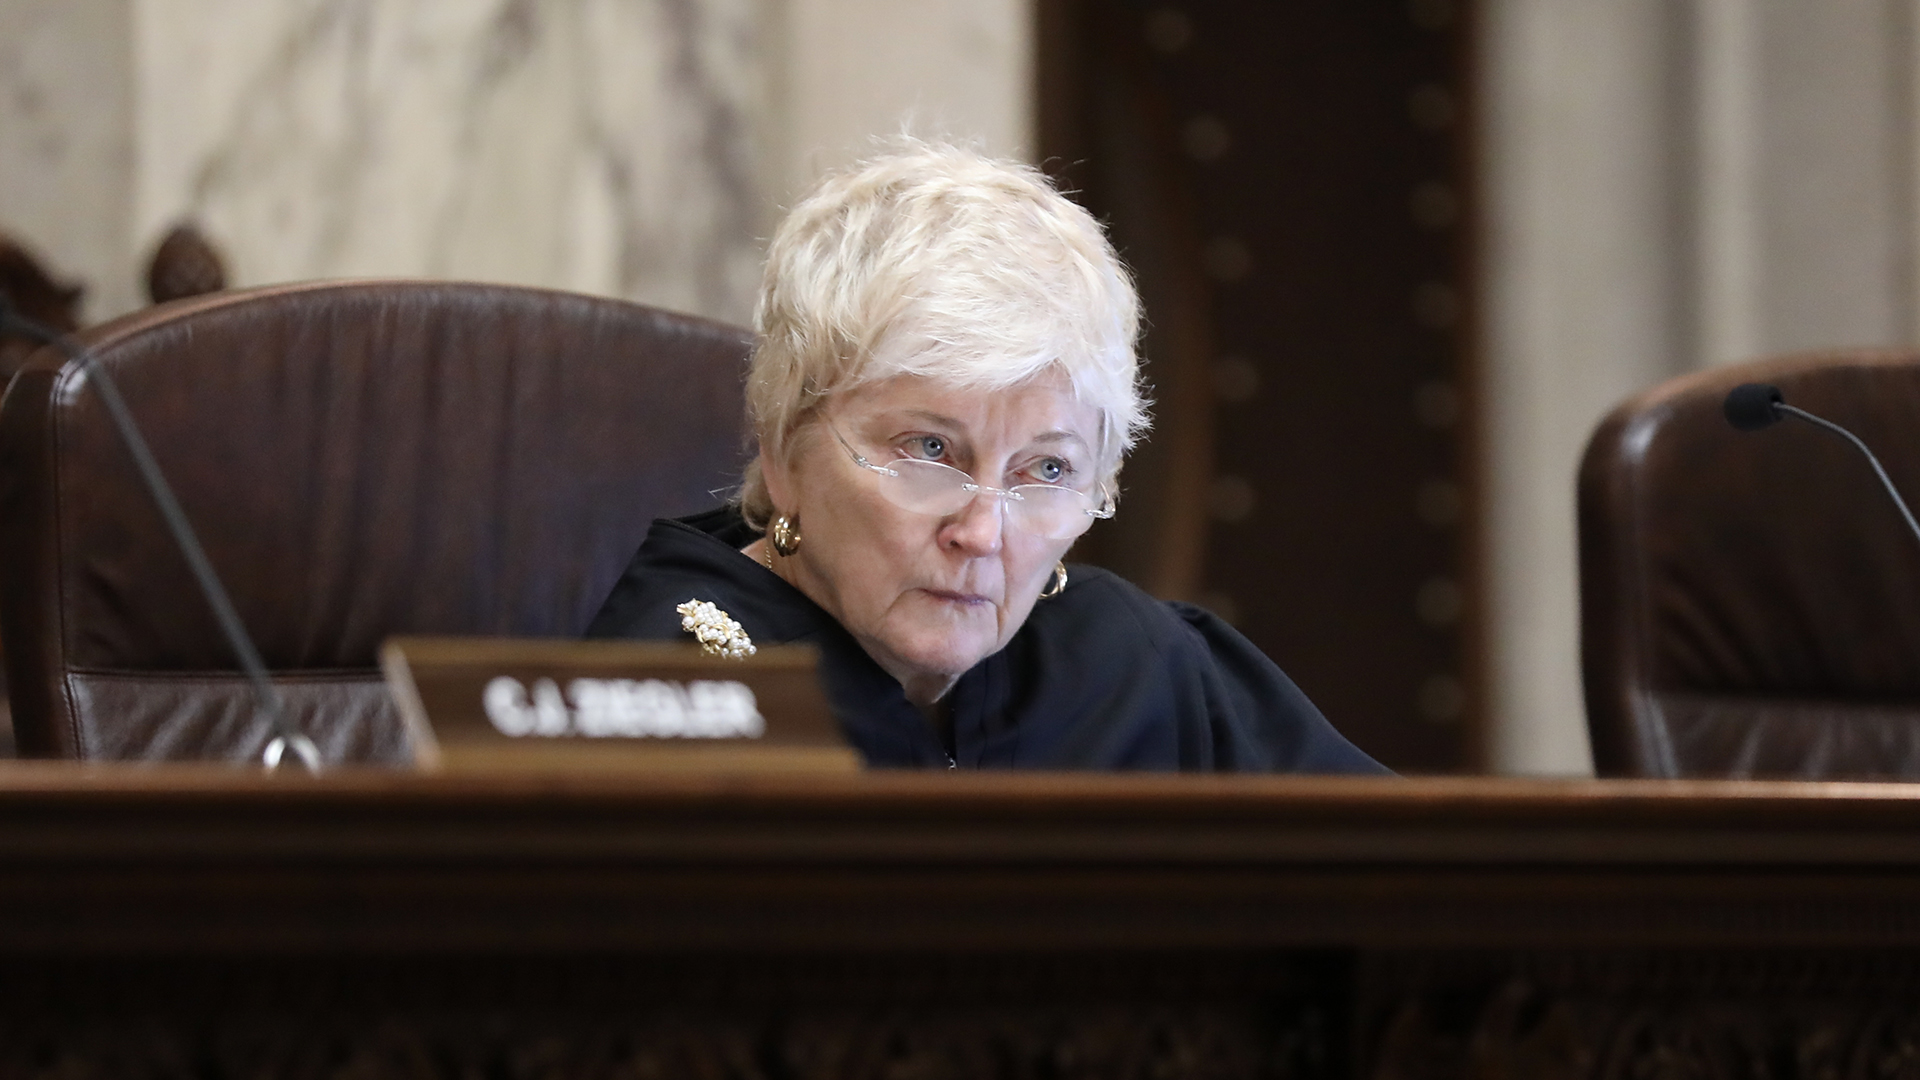 Patience Roggensack sits in a chair behind a judicial bench and listens to another speaker.